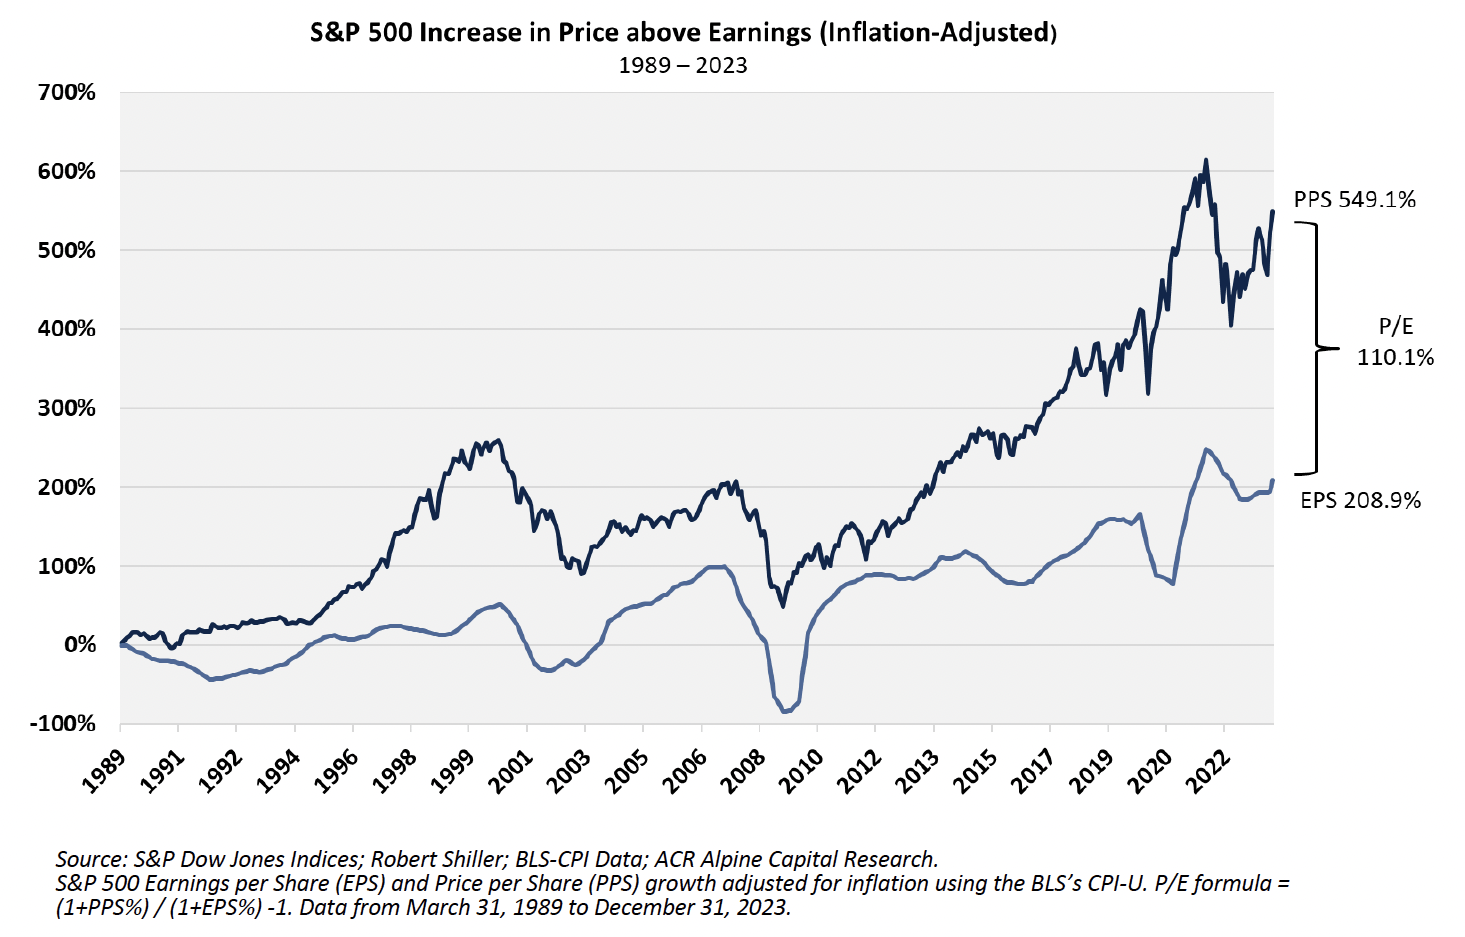 S&P 500 Increase in Price above Earnings (Inflation-Adjusted) 1989-2023